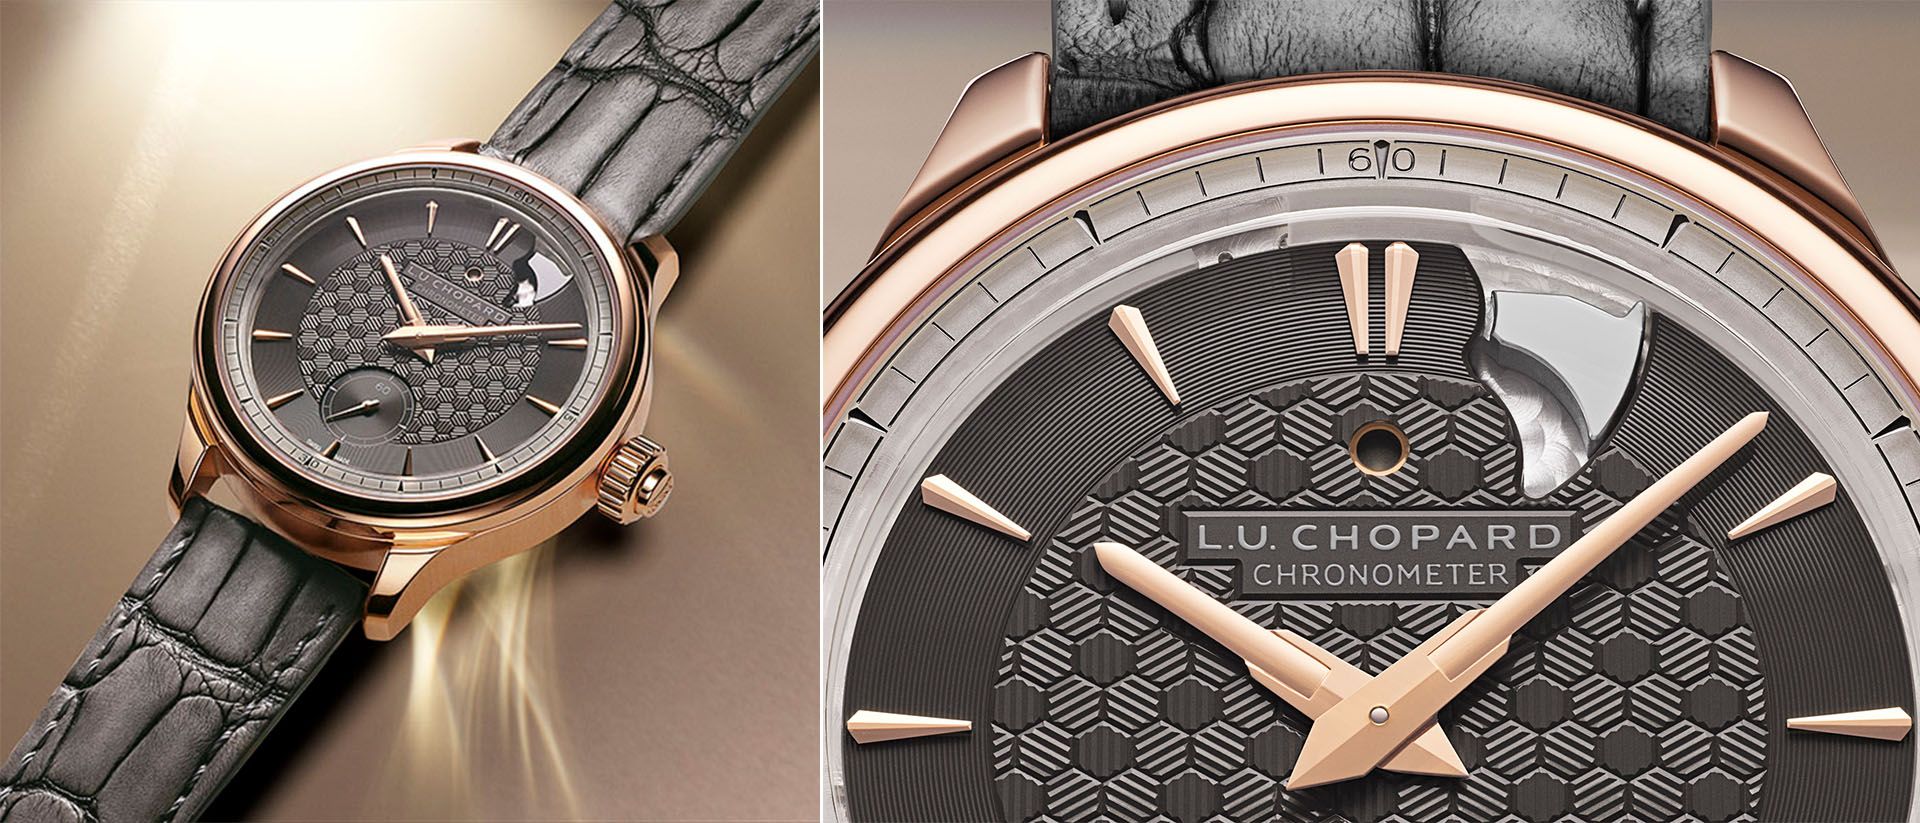 LU.Chopard Strike One watch with a ‘chime-in-passing’ mechanism